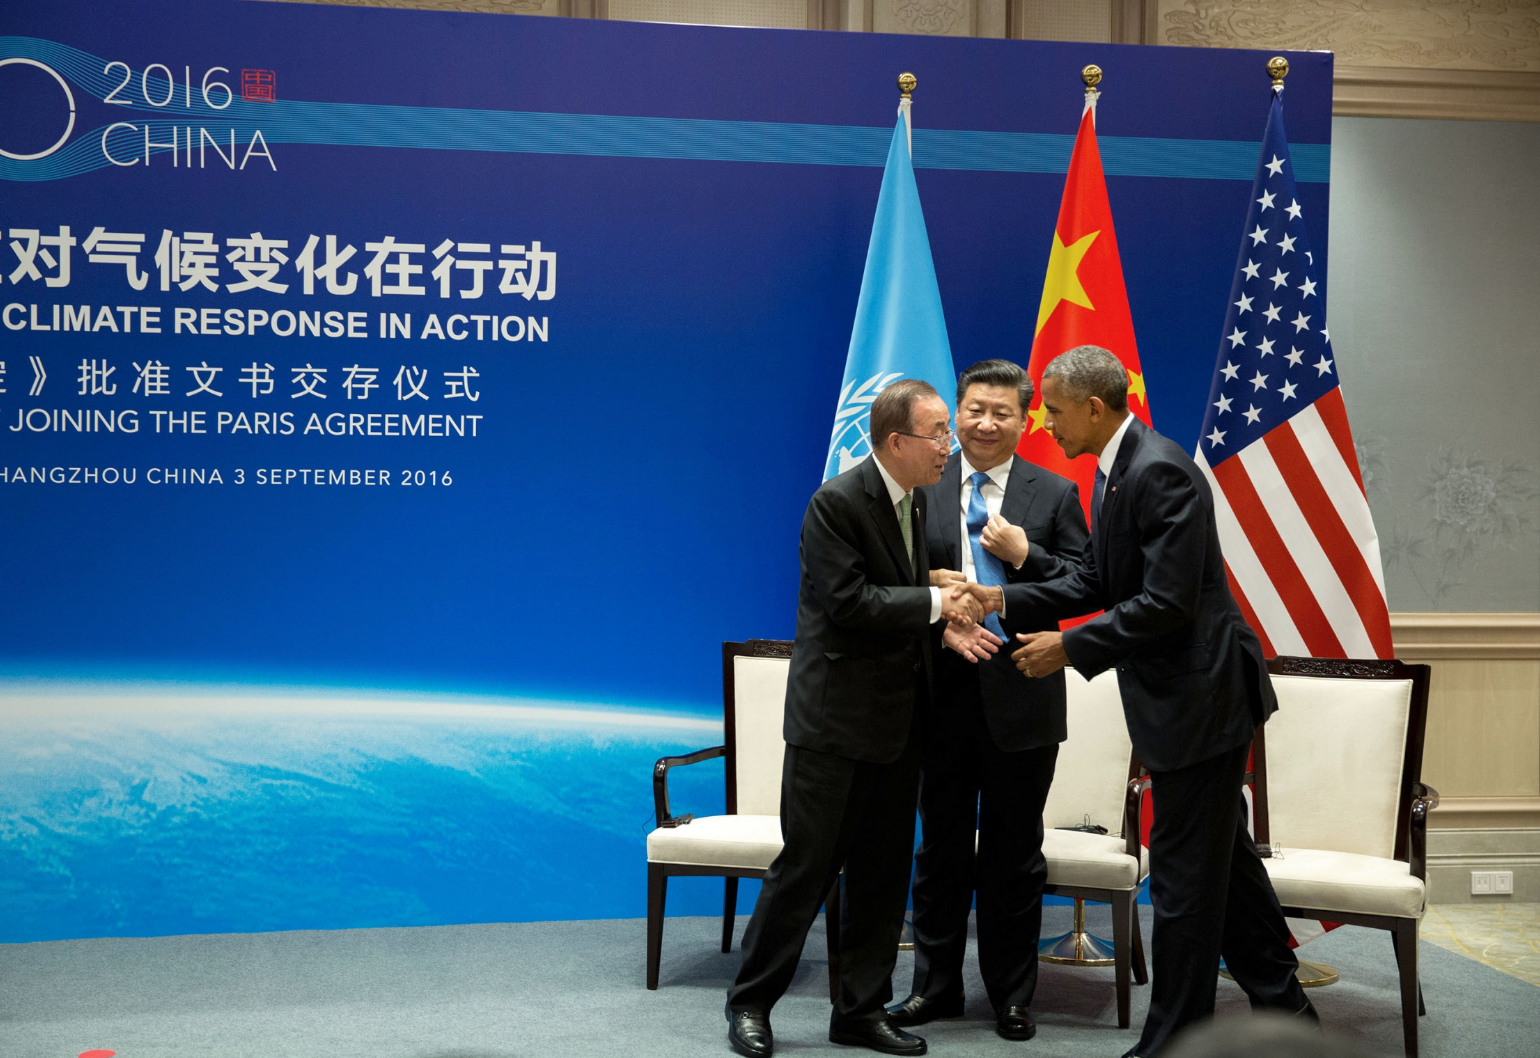 US President Barack Obama, President Xi Jinping of China and United Nations Secretary General Ban Ki-moon exchange greetings at the conclusion of a climate event at West Lake State House in Hangzhou, China, September 3, 2016